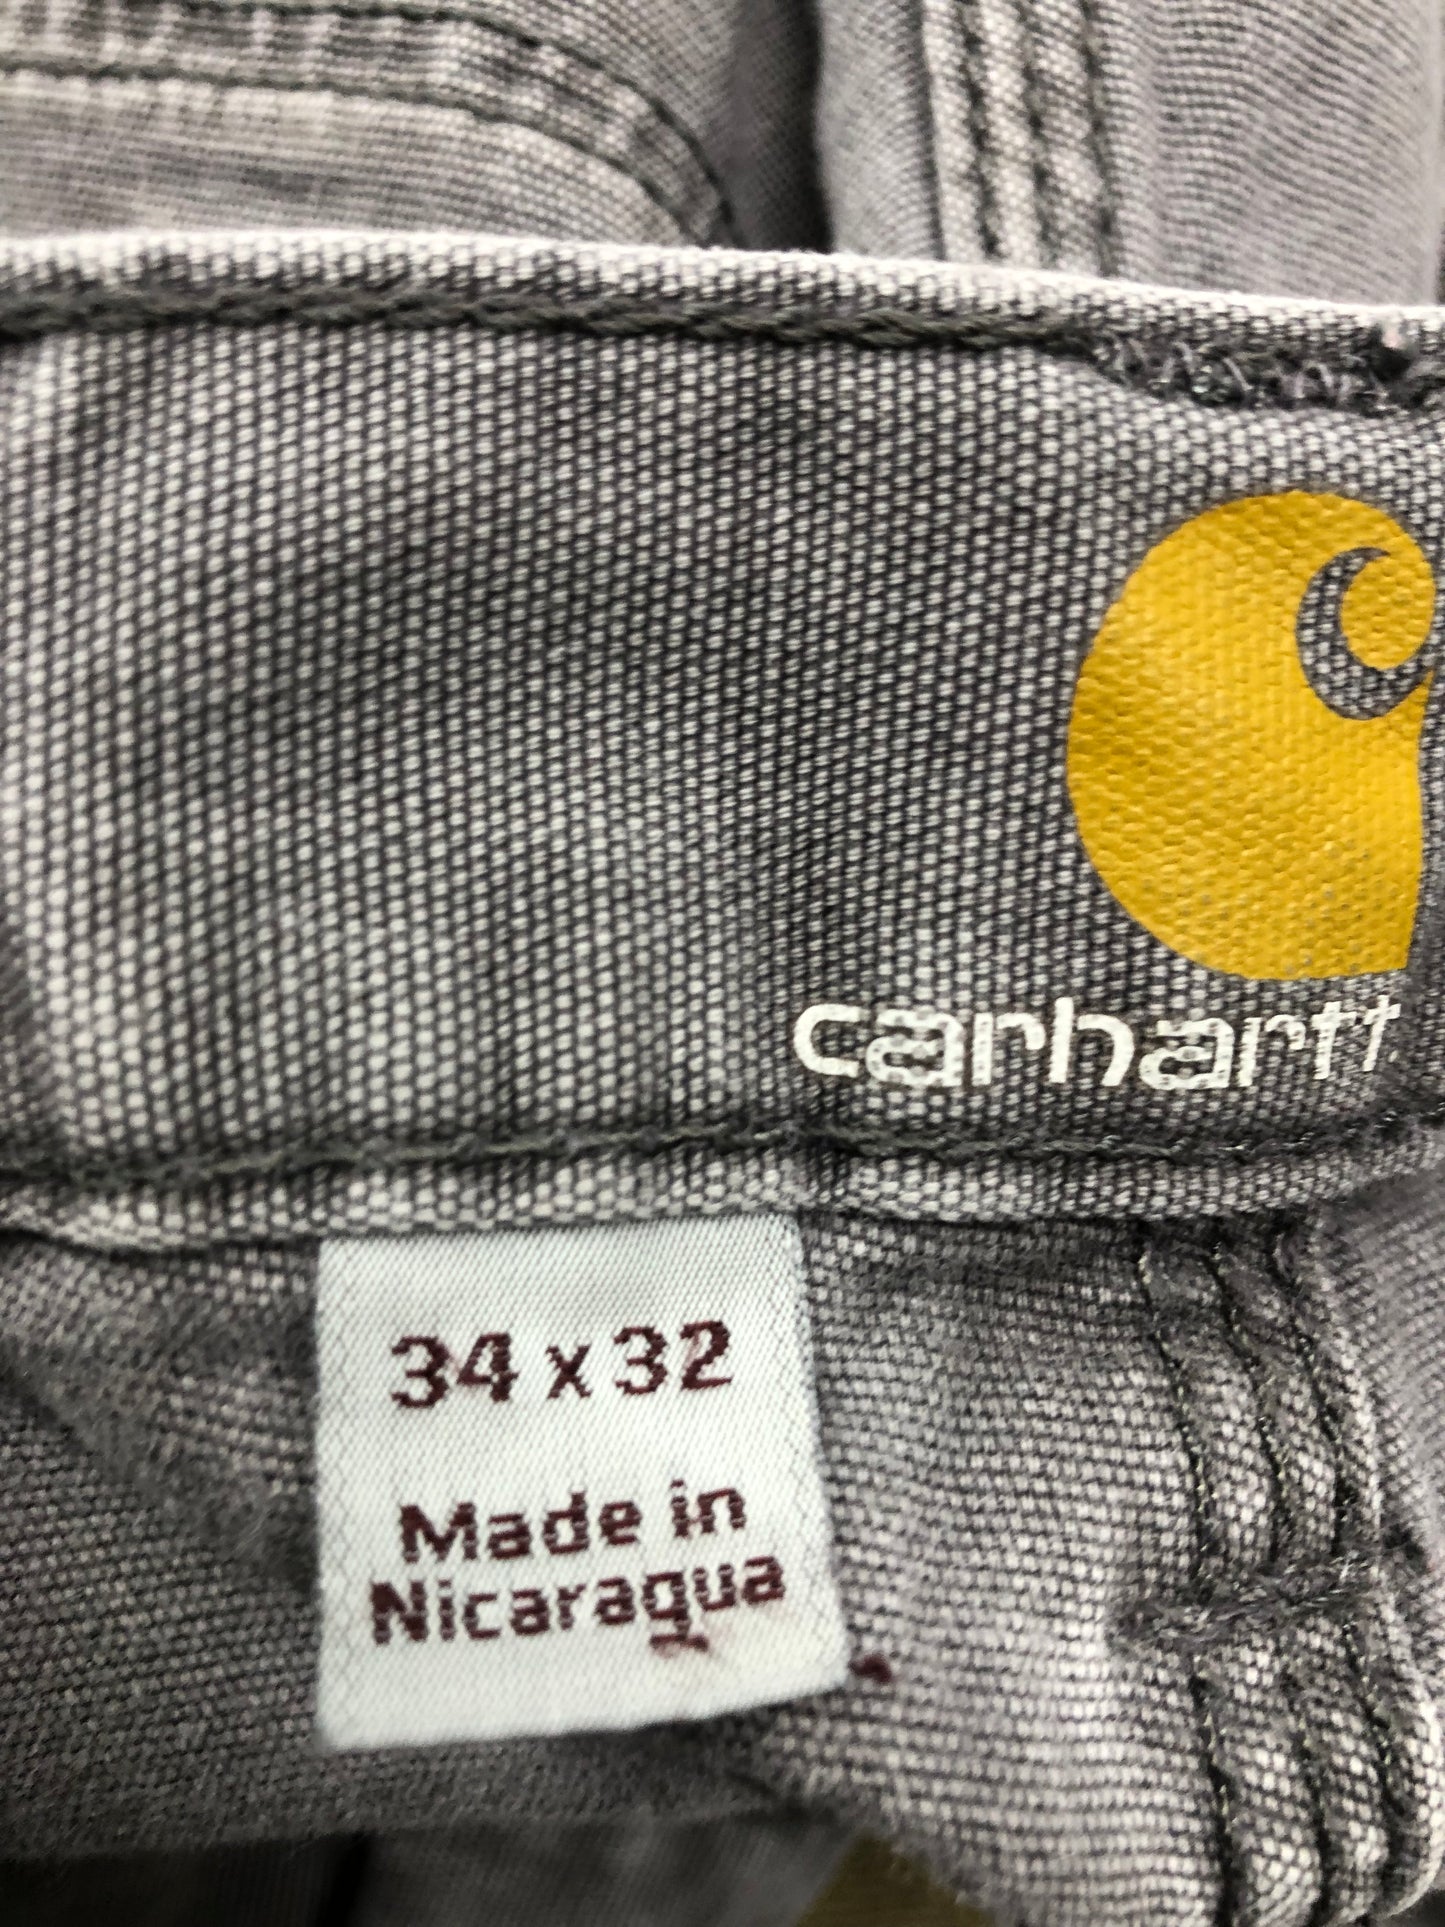 Used Gray Carhartt Relaxed Fit Jeans Sz 33x30